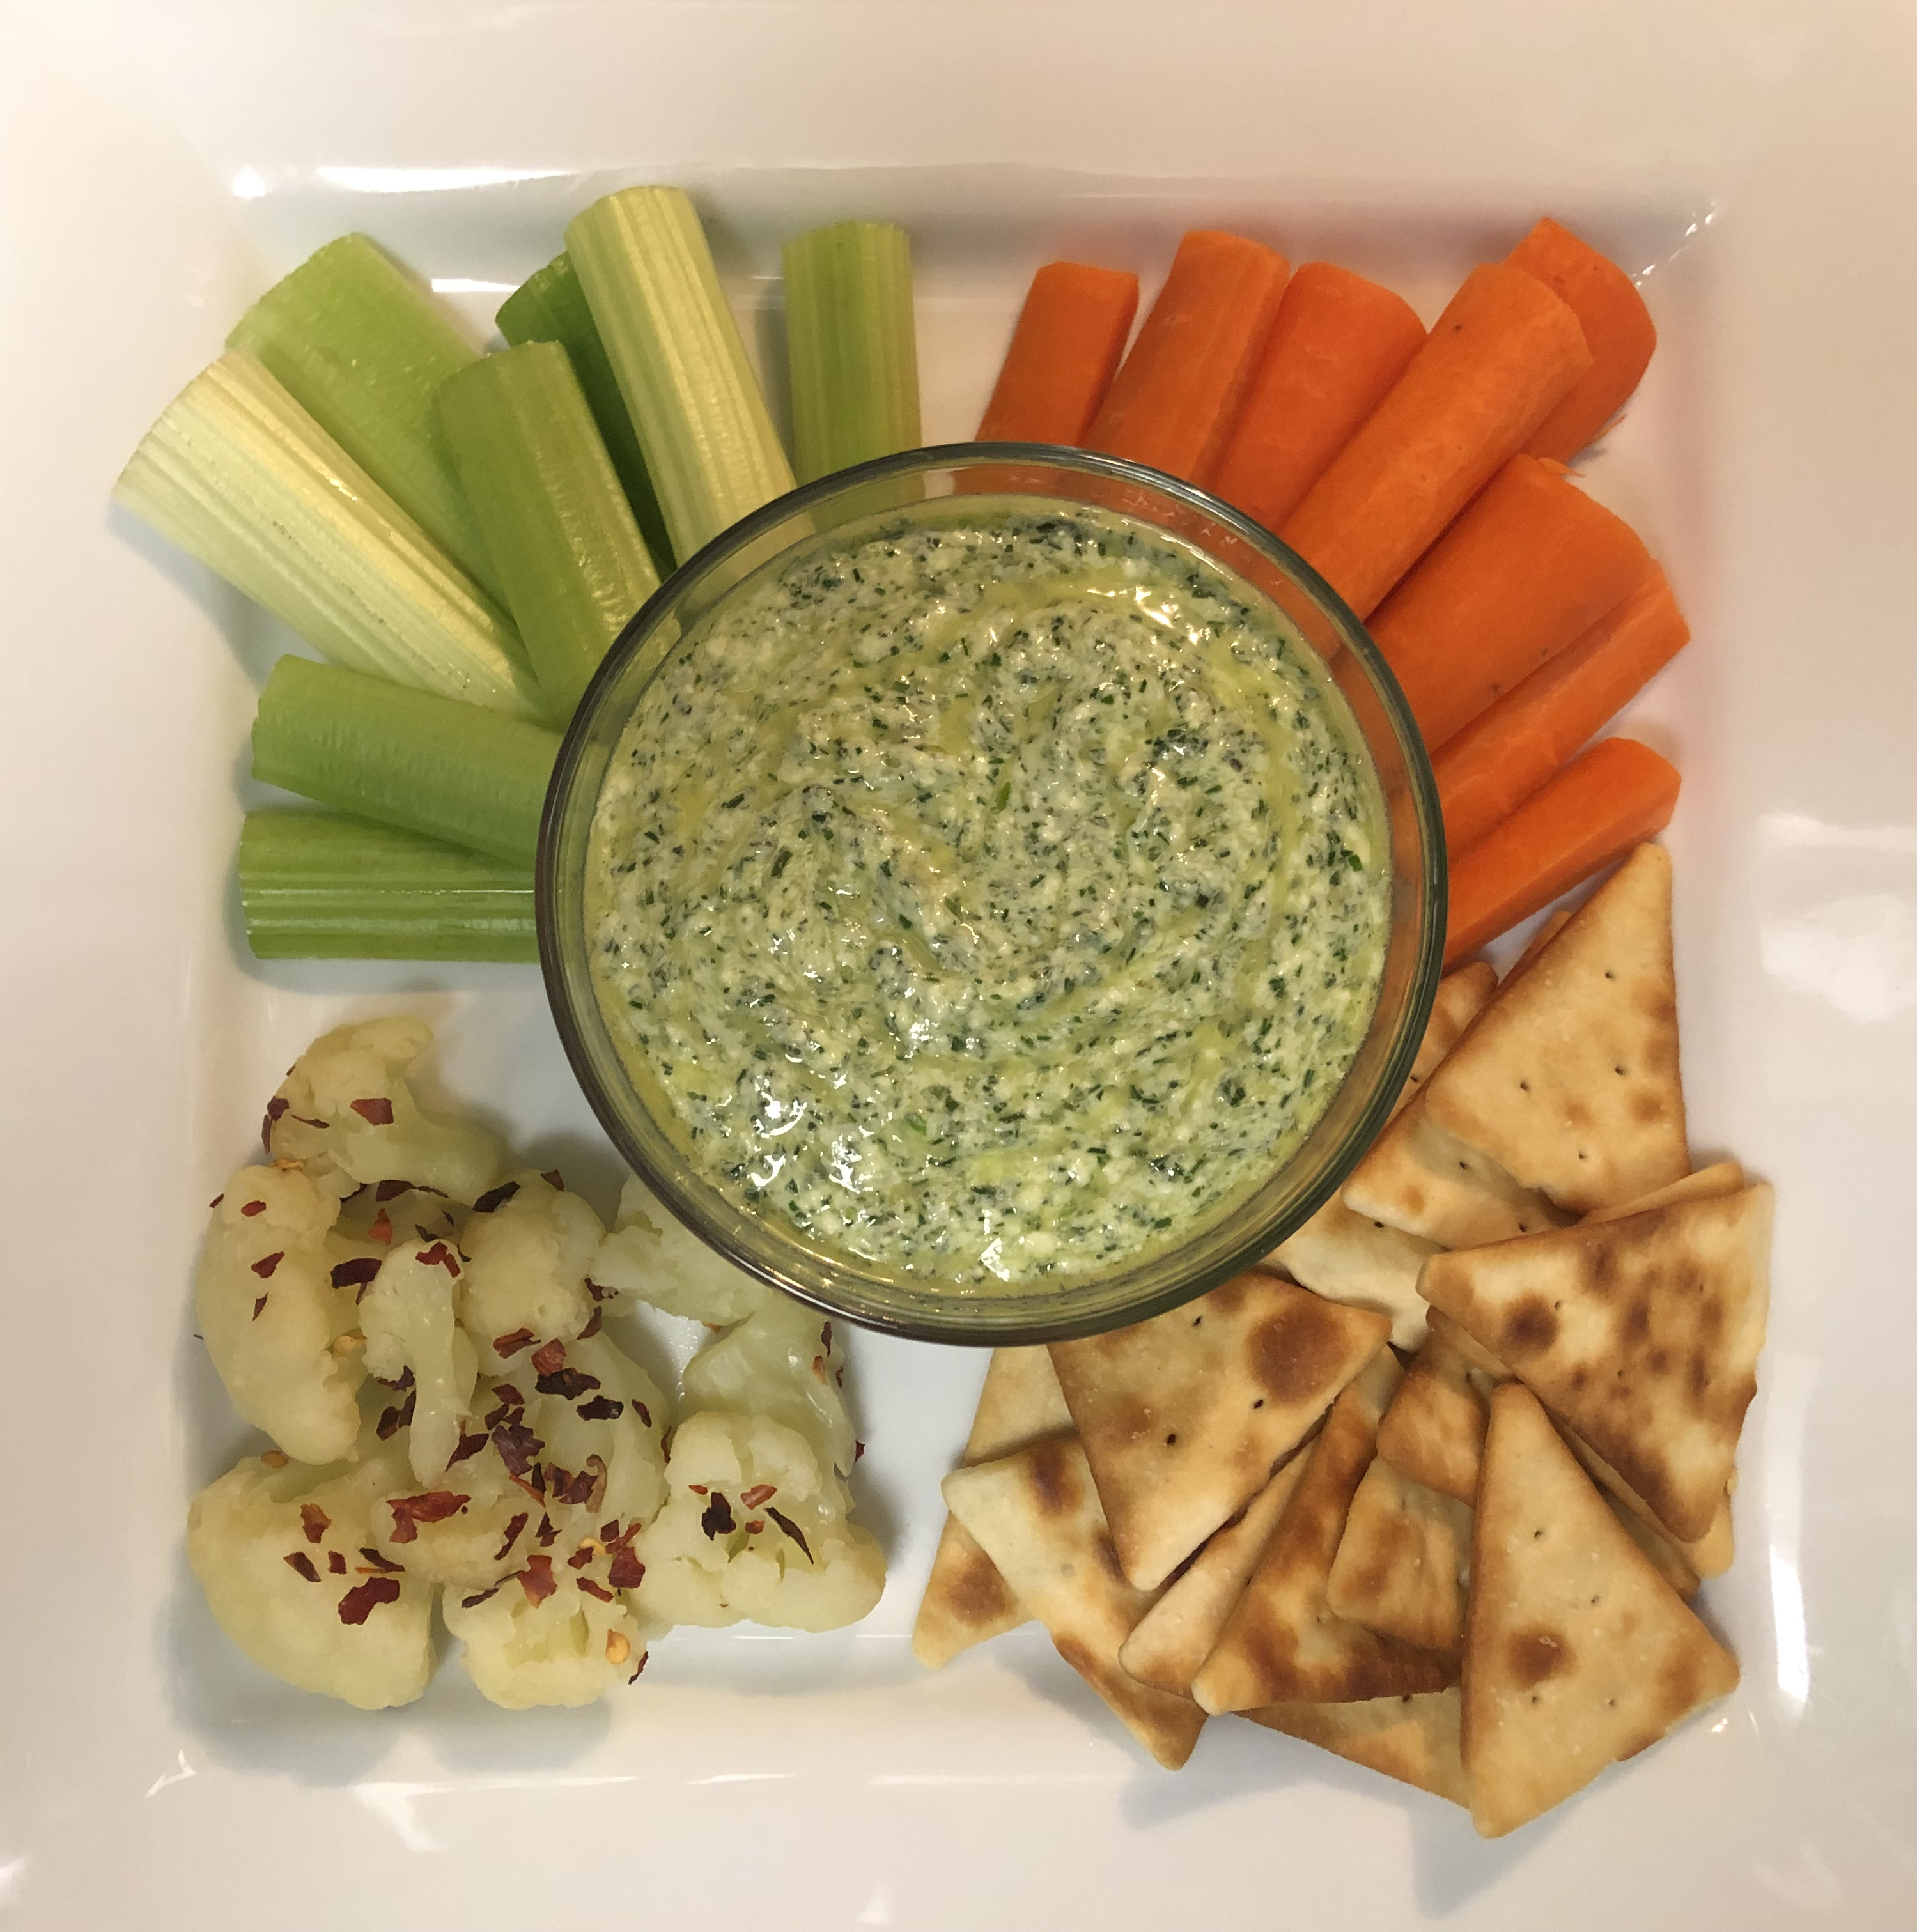 Green Goddess dip plated in a bowl in center of plate. Surrounding the bowl is carrots, celery, pita chips, and cauliflower with red pepper flakes.